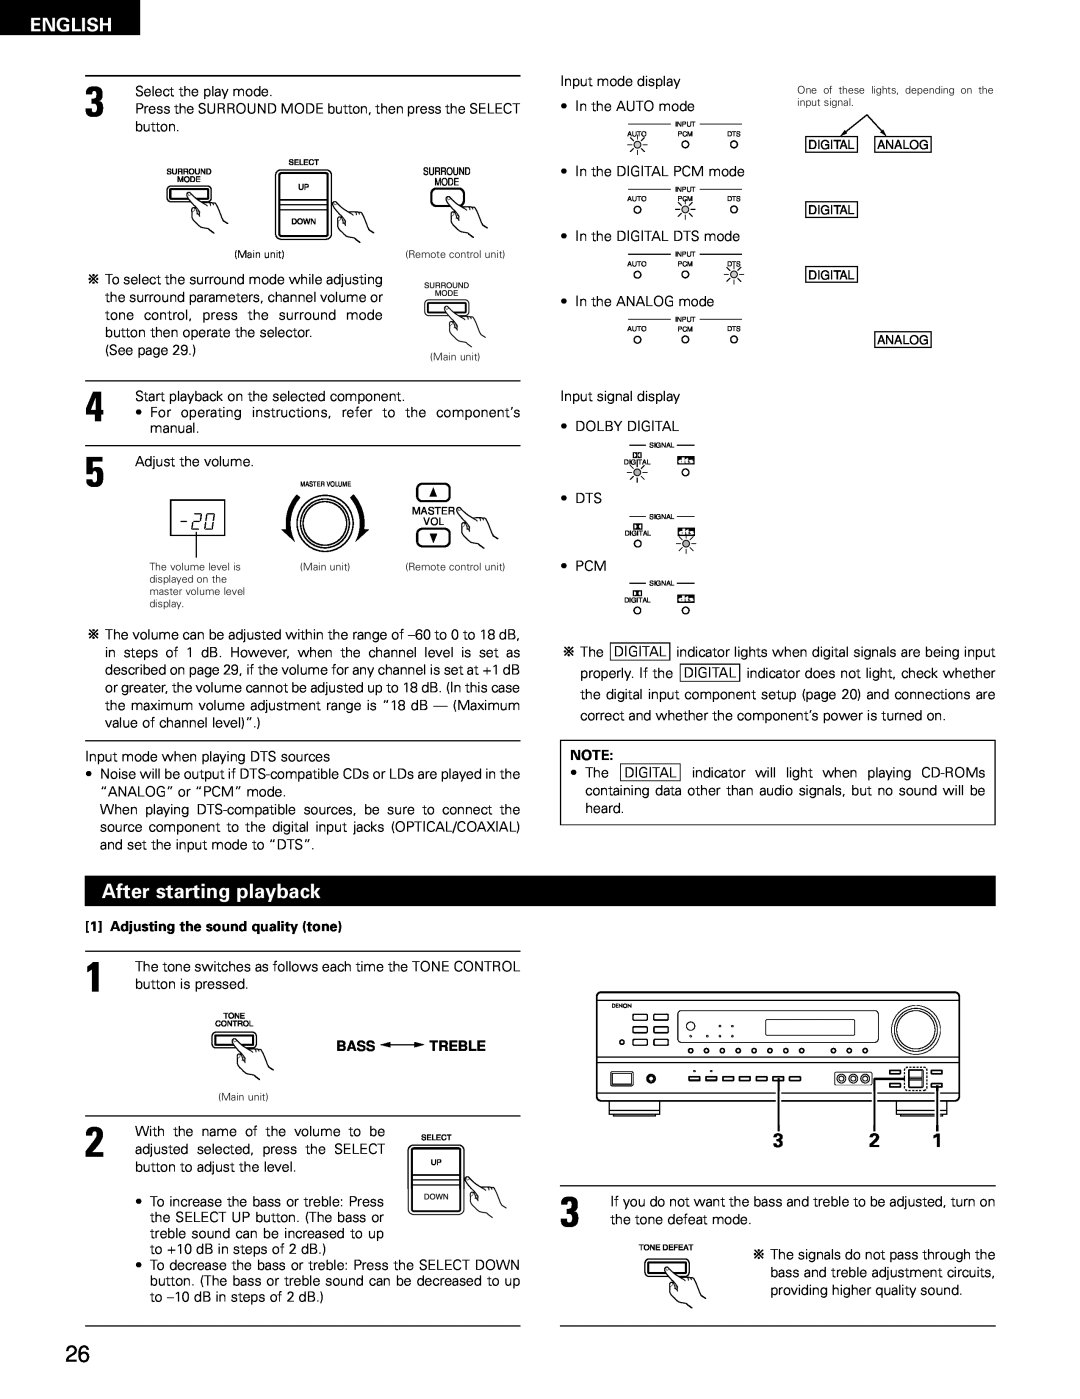 Denon 483, AVR-1403 manual After starting playback, English, Adjusting the sound quality tone 